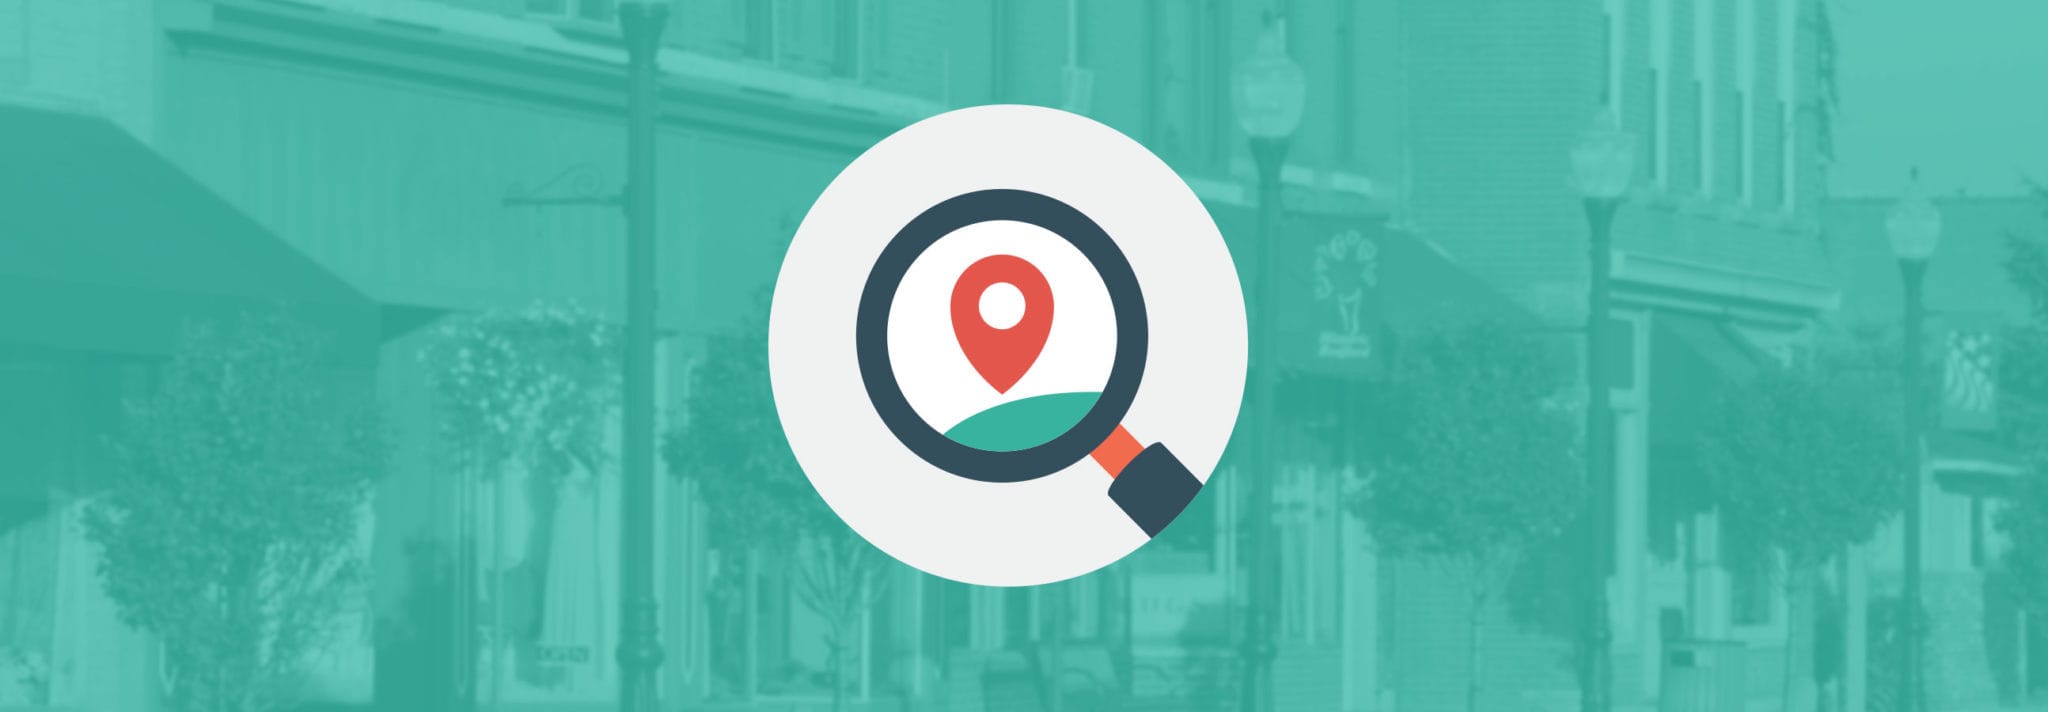 Optimizing Your Business Listings For Local SEO